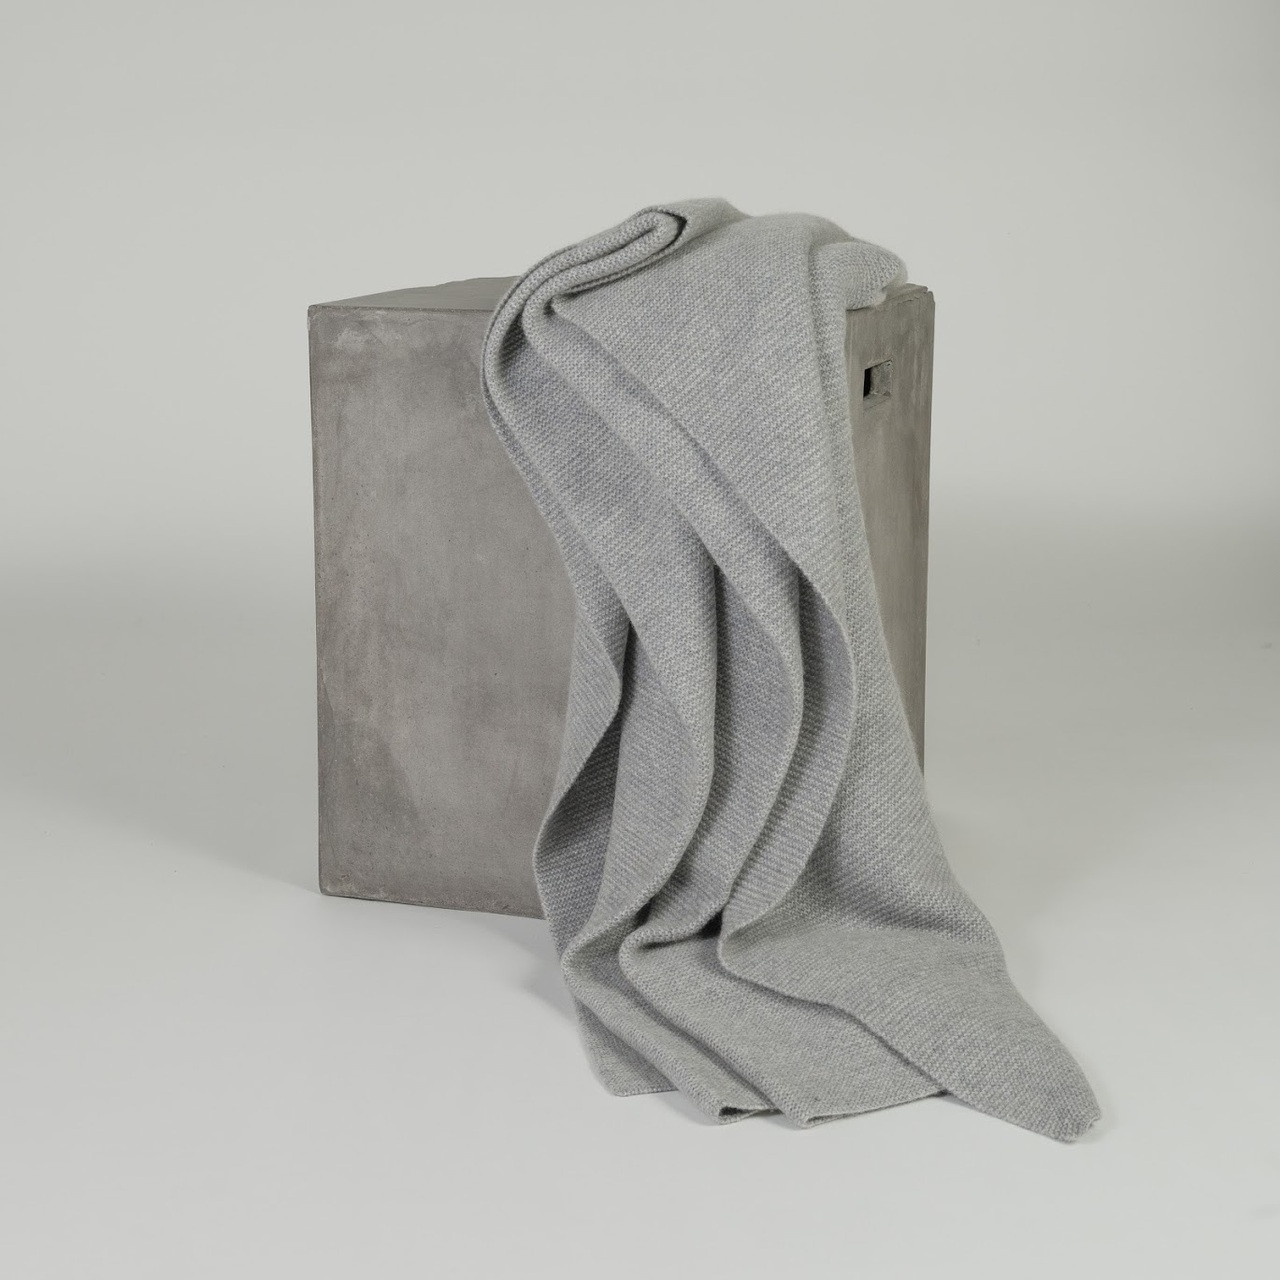 Organic Gray Purl Knit Cashmere Throw